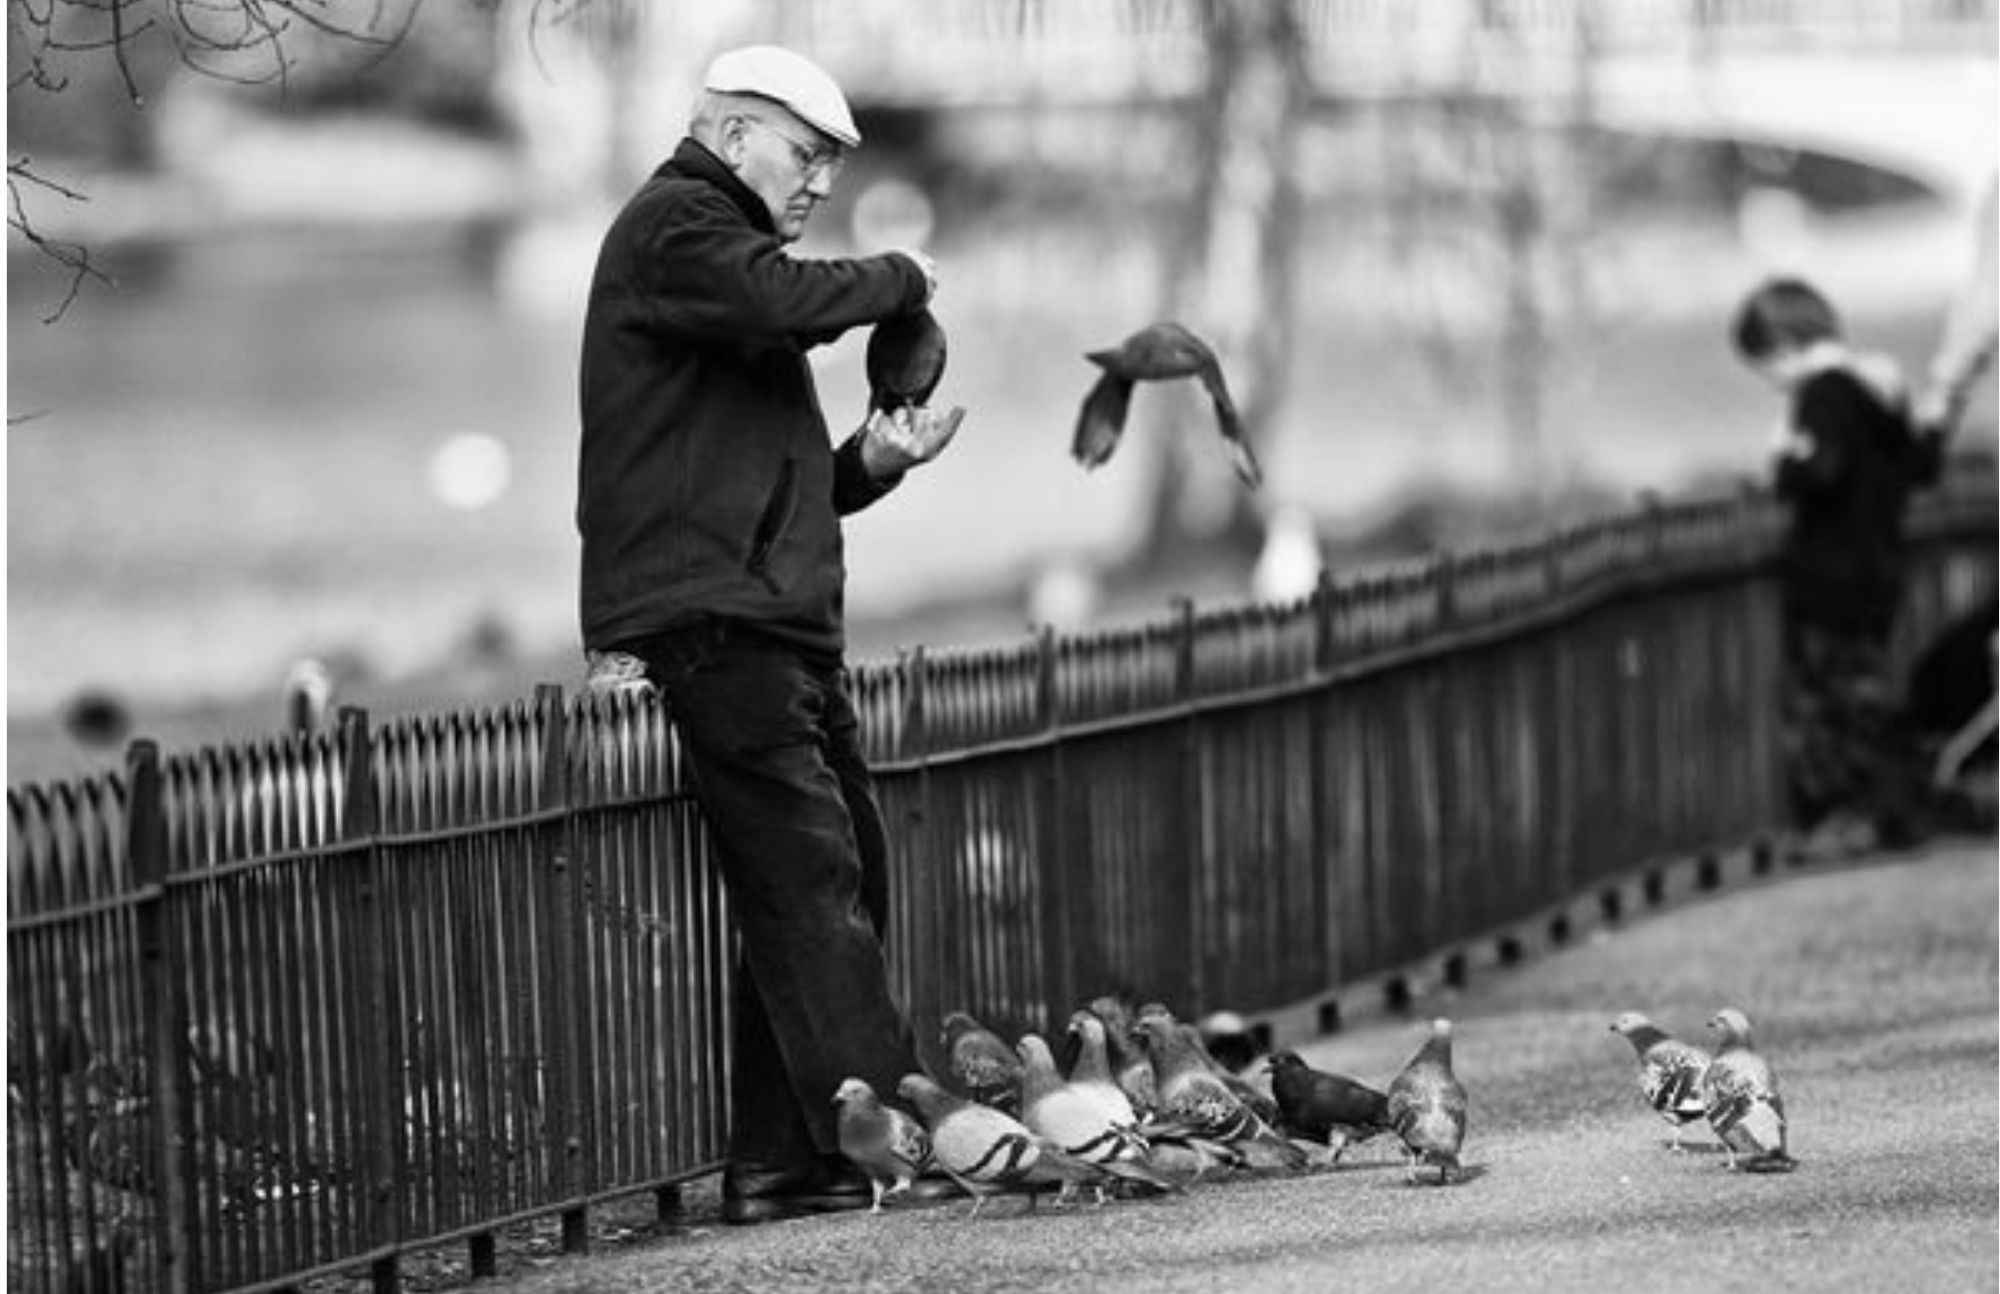 A man and the pigeons on the street